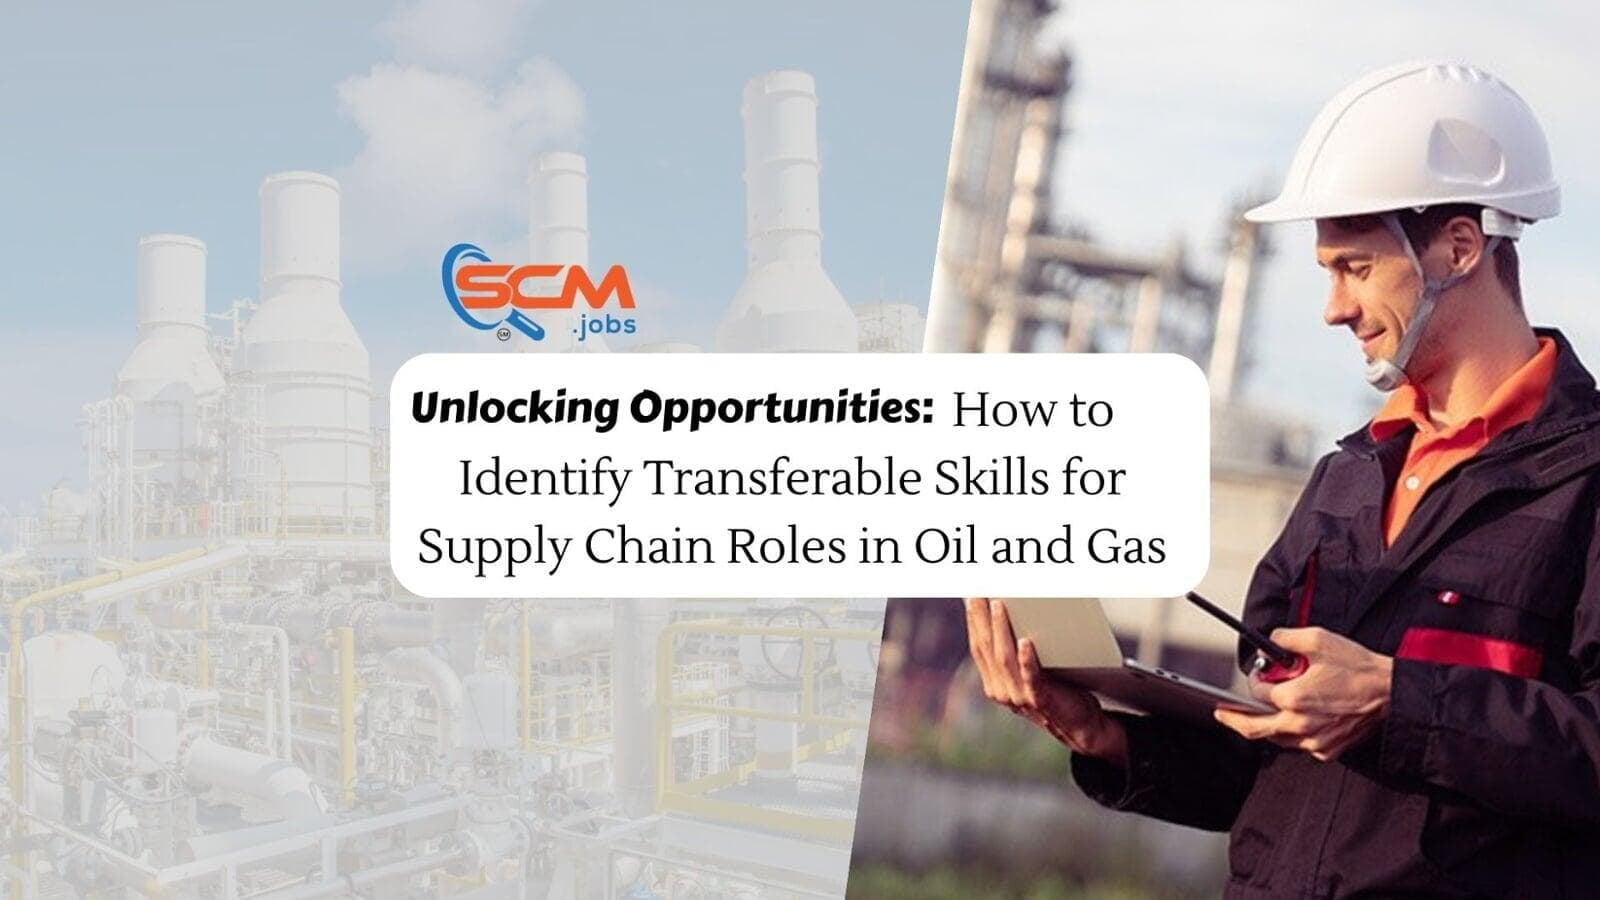 Unlocking Opportunities: How to Identify Transferable Skills for Supply Chain Roles in Oil and Gas